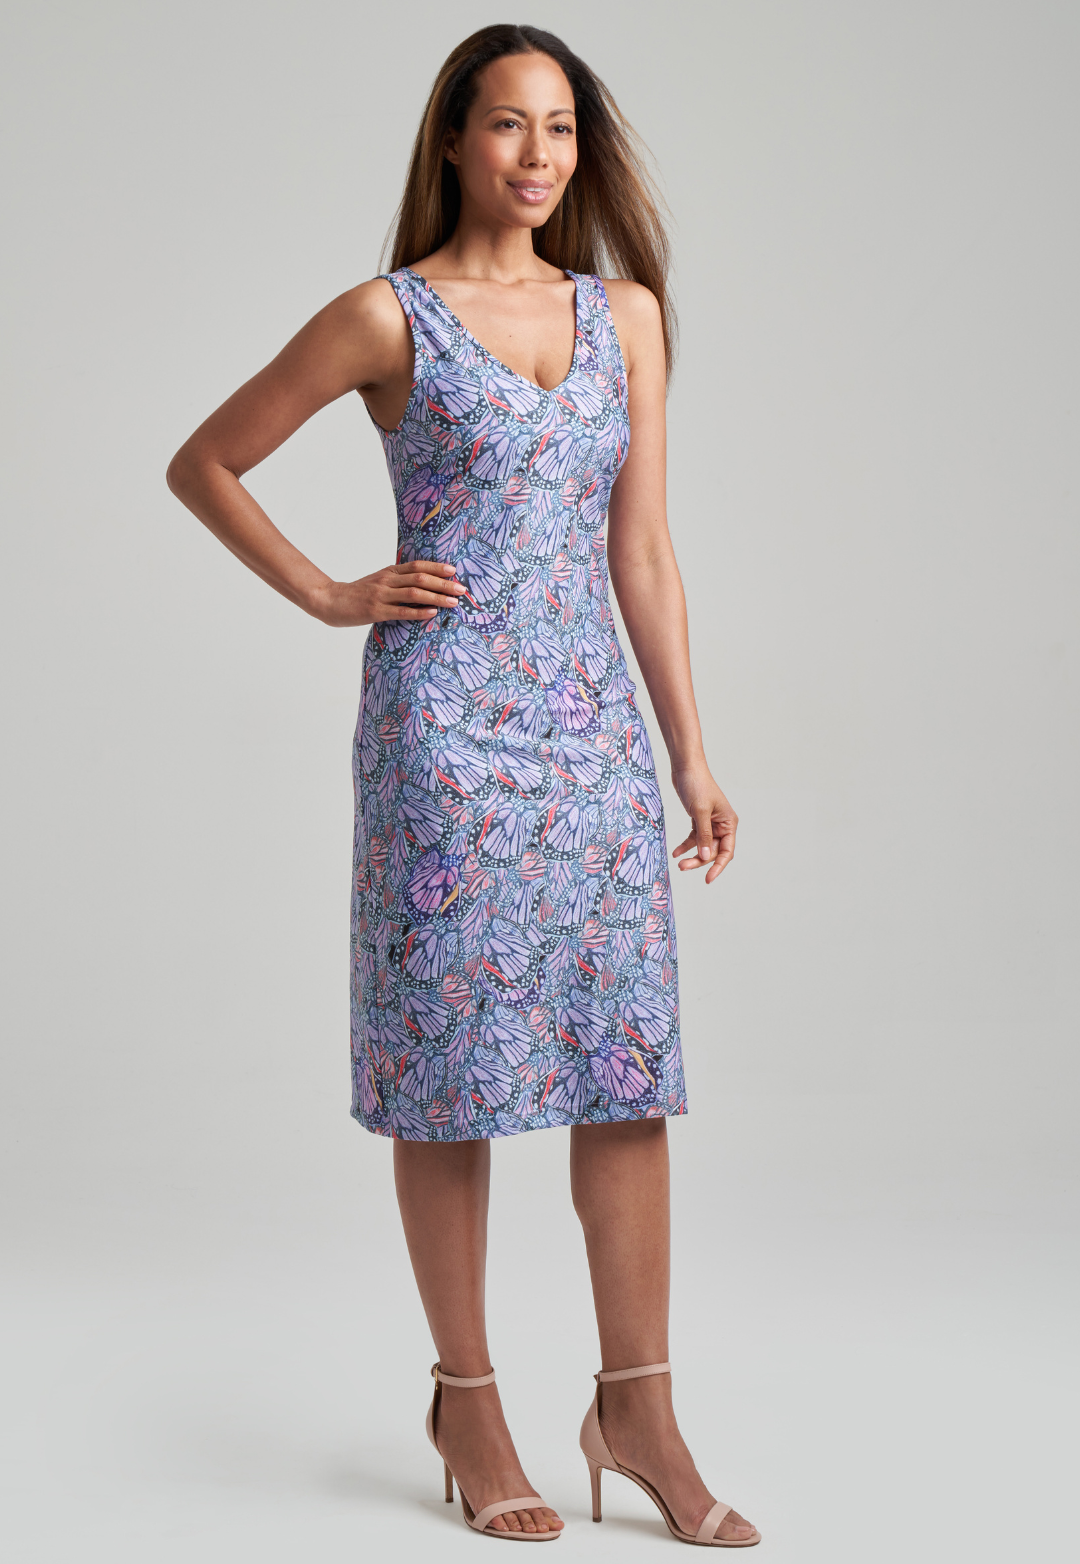 Woman wearing stretch knit butterfly printed short dress by Ala von Auersperg for spring summer 2021